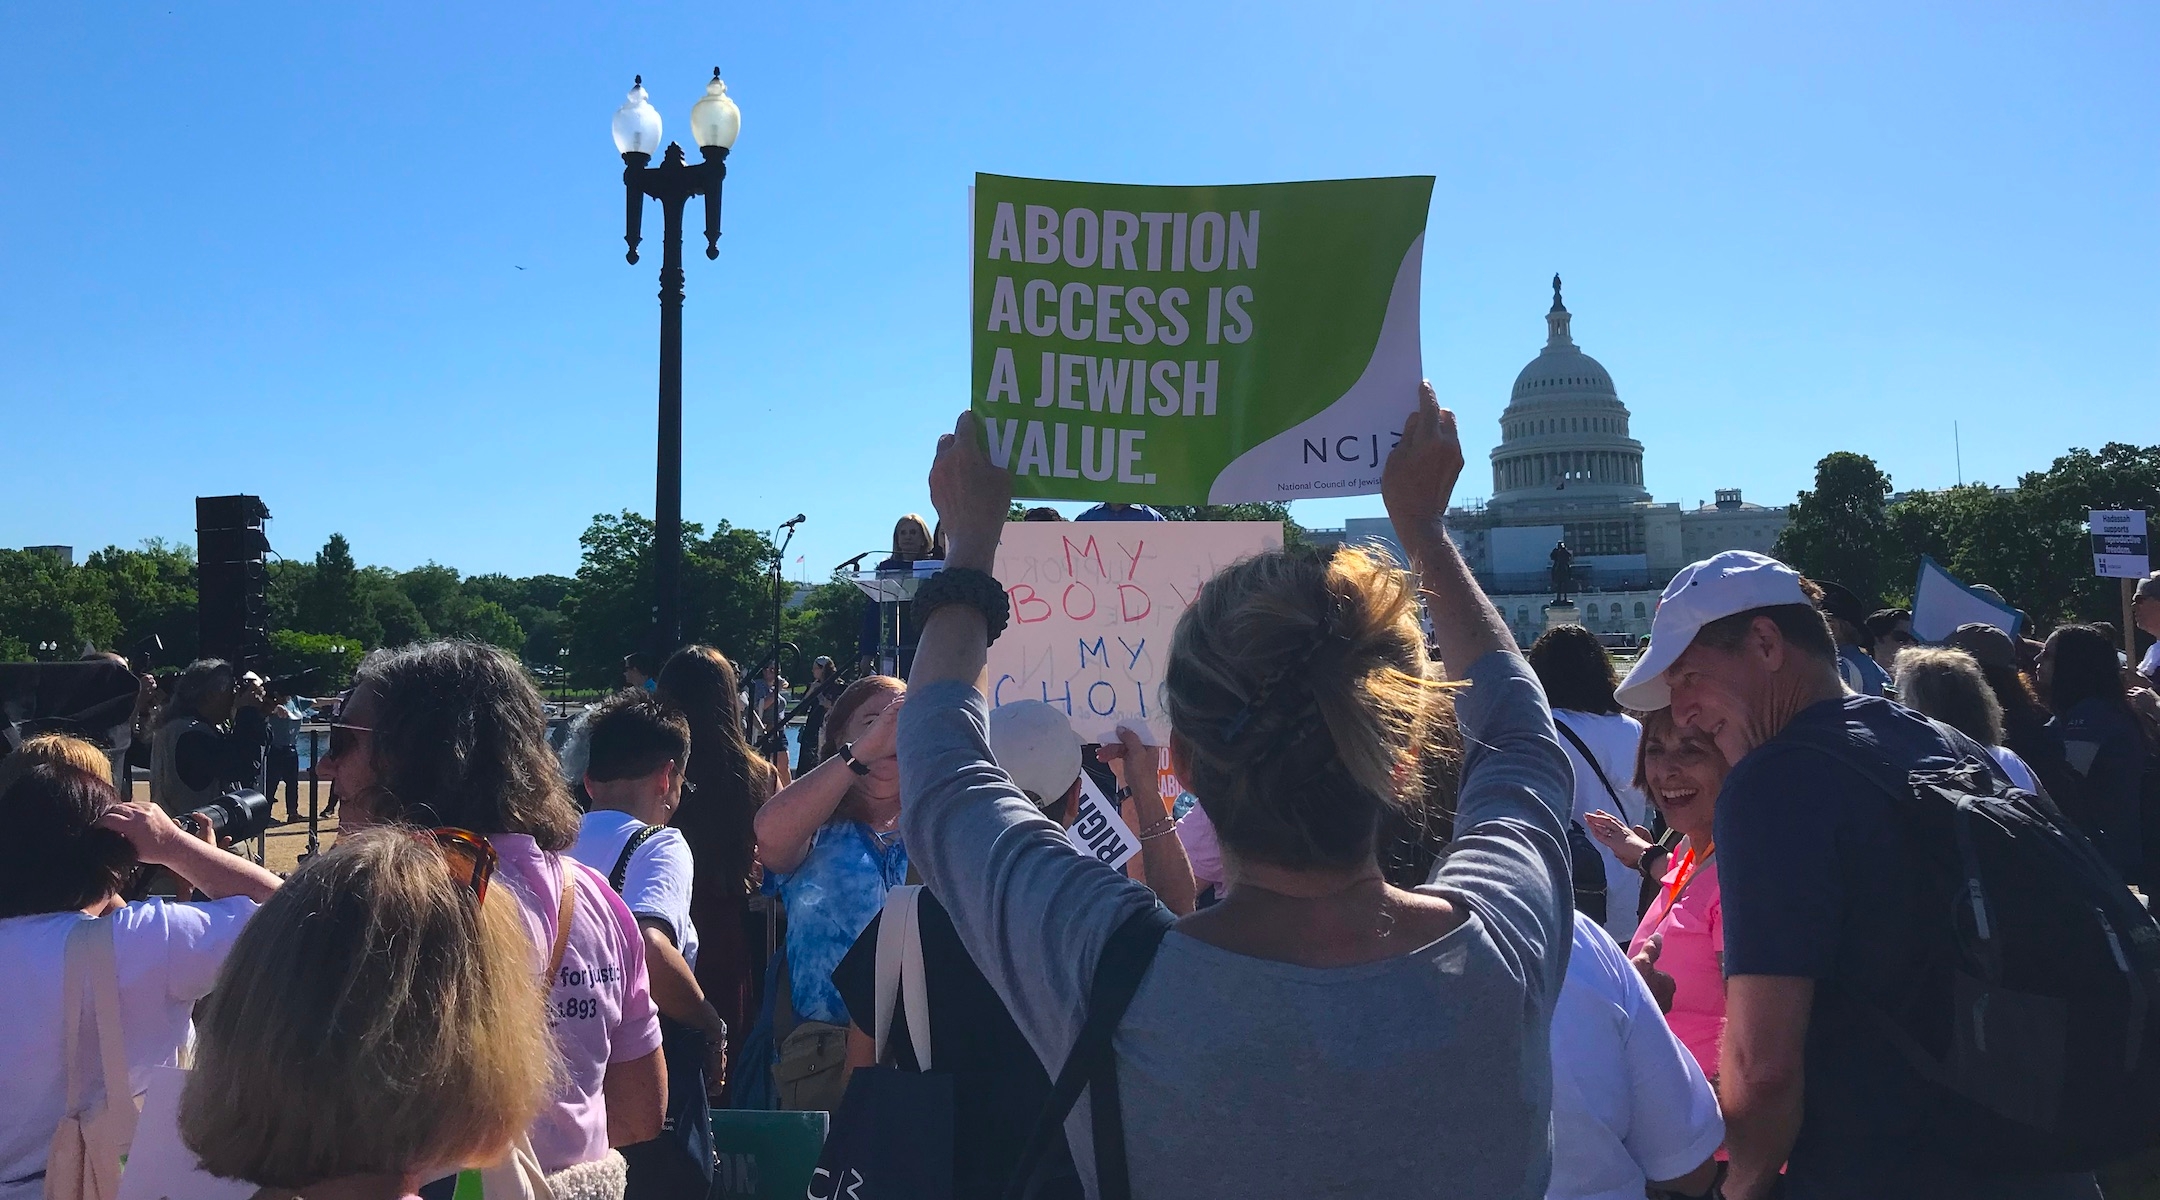 A protester holds up a sign reading “Abortion Access is a Jewish Value” at a rally in front of the US Capitol Building organized by the National Council for Jewish Women, May 17, 2022. (Julia Gergely)